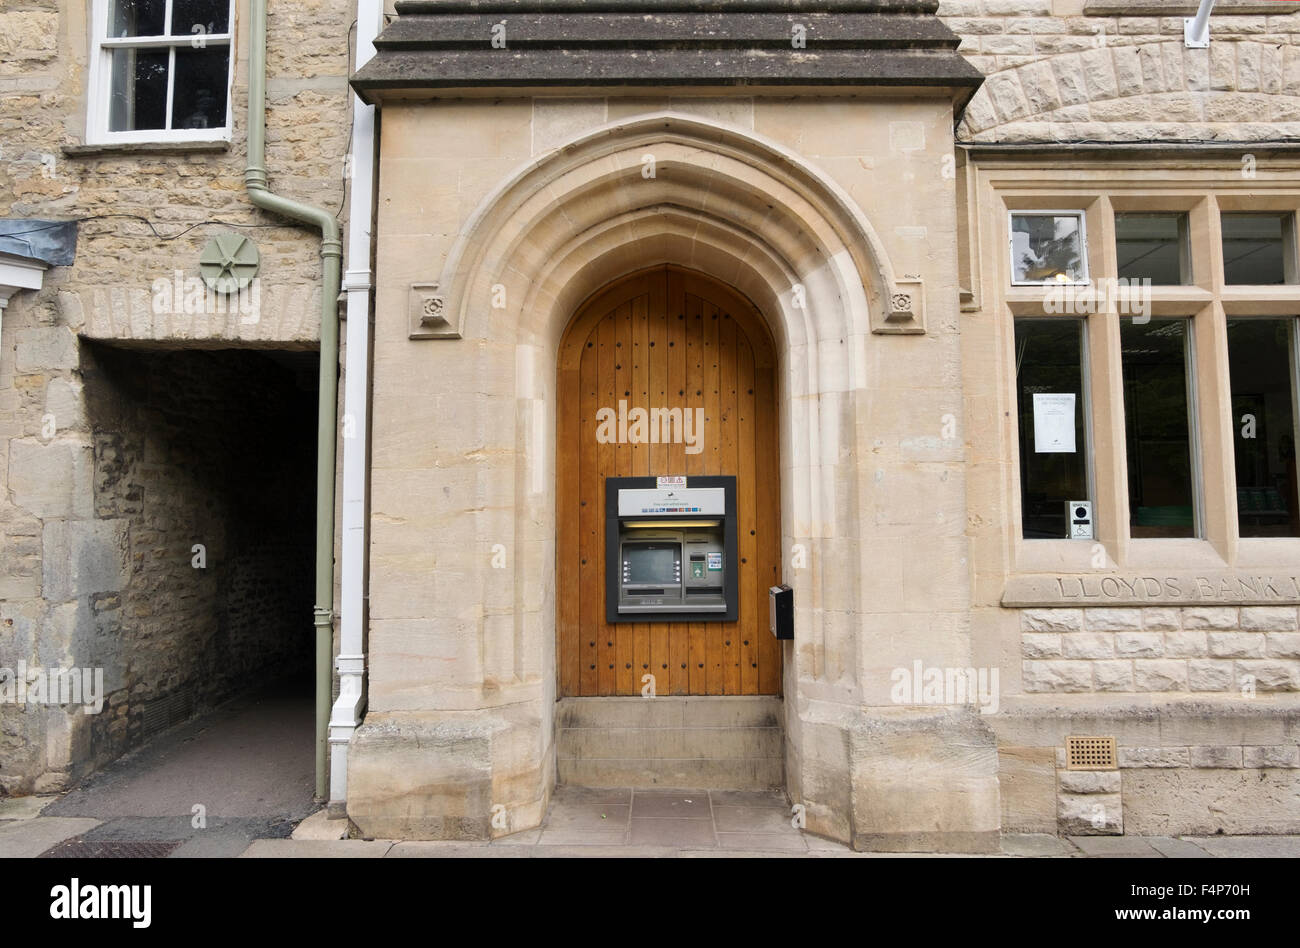 Cash Point at the local branch of Lloyds Bank in the High Street in Fairford, Gloucestershire, UK Stock Photo